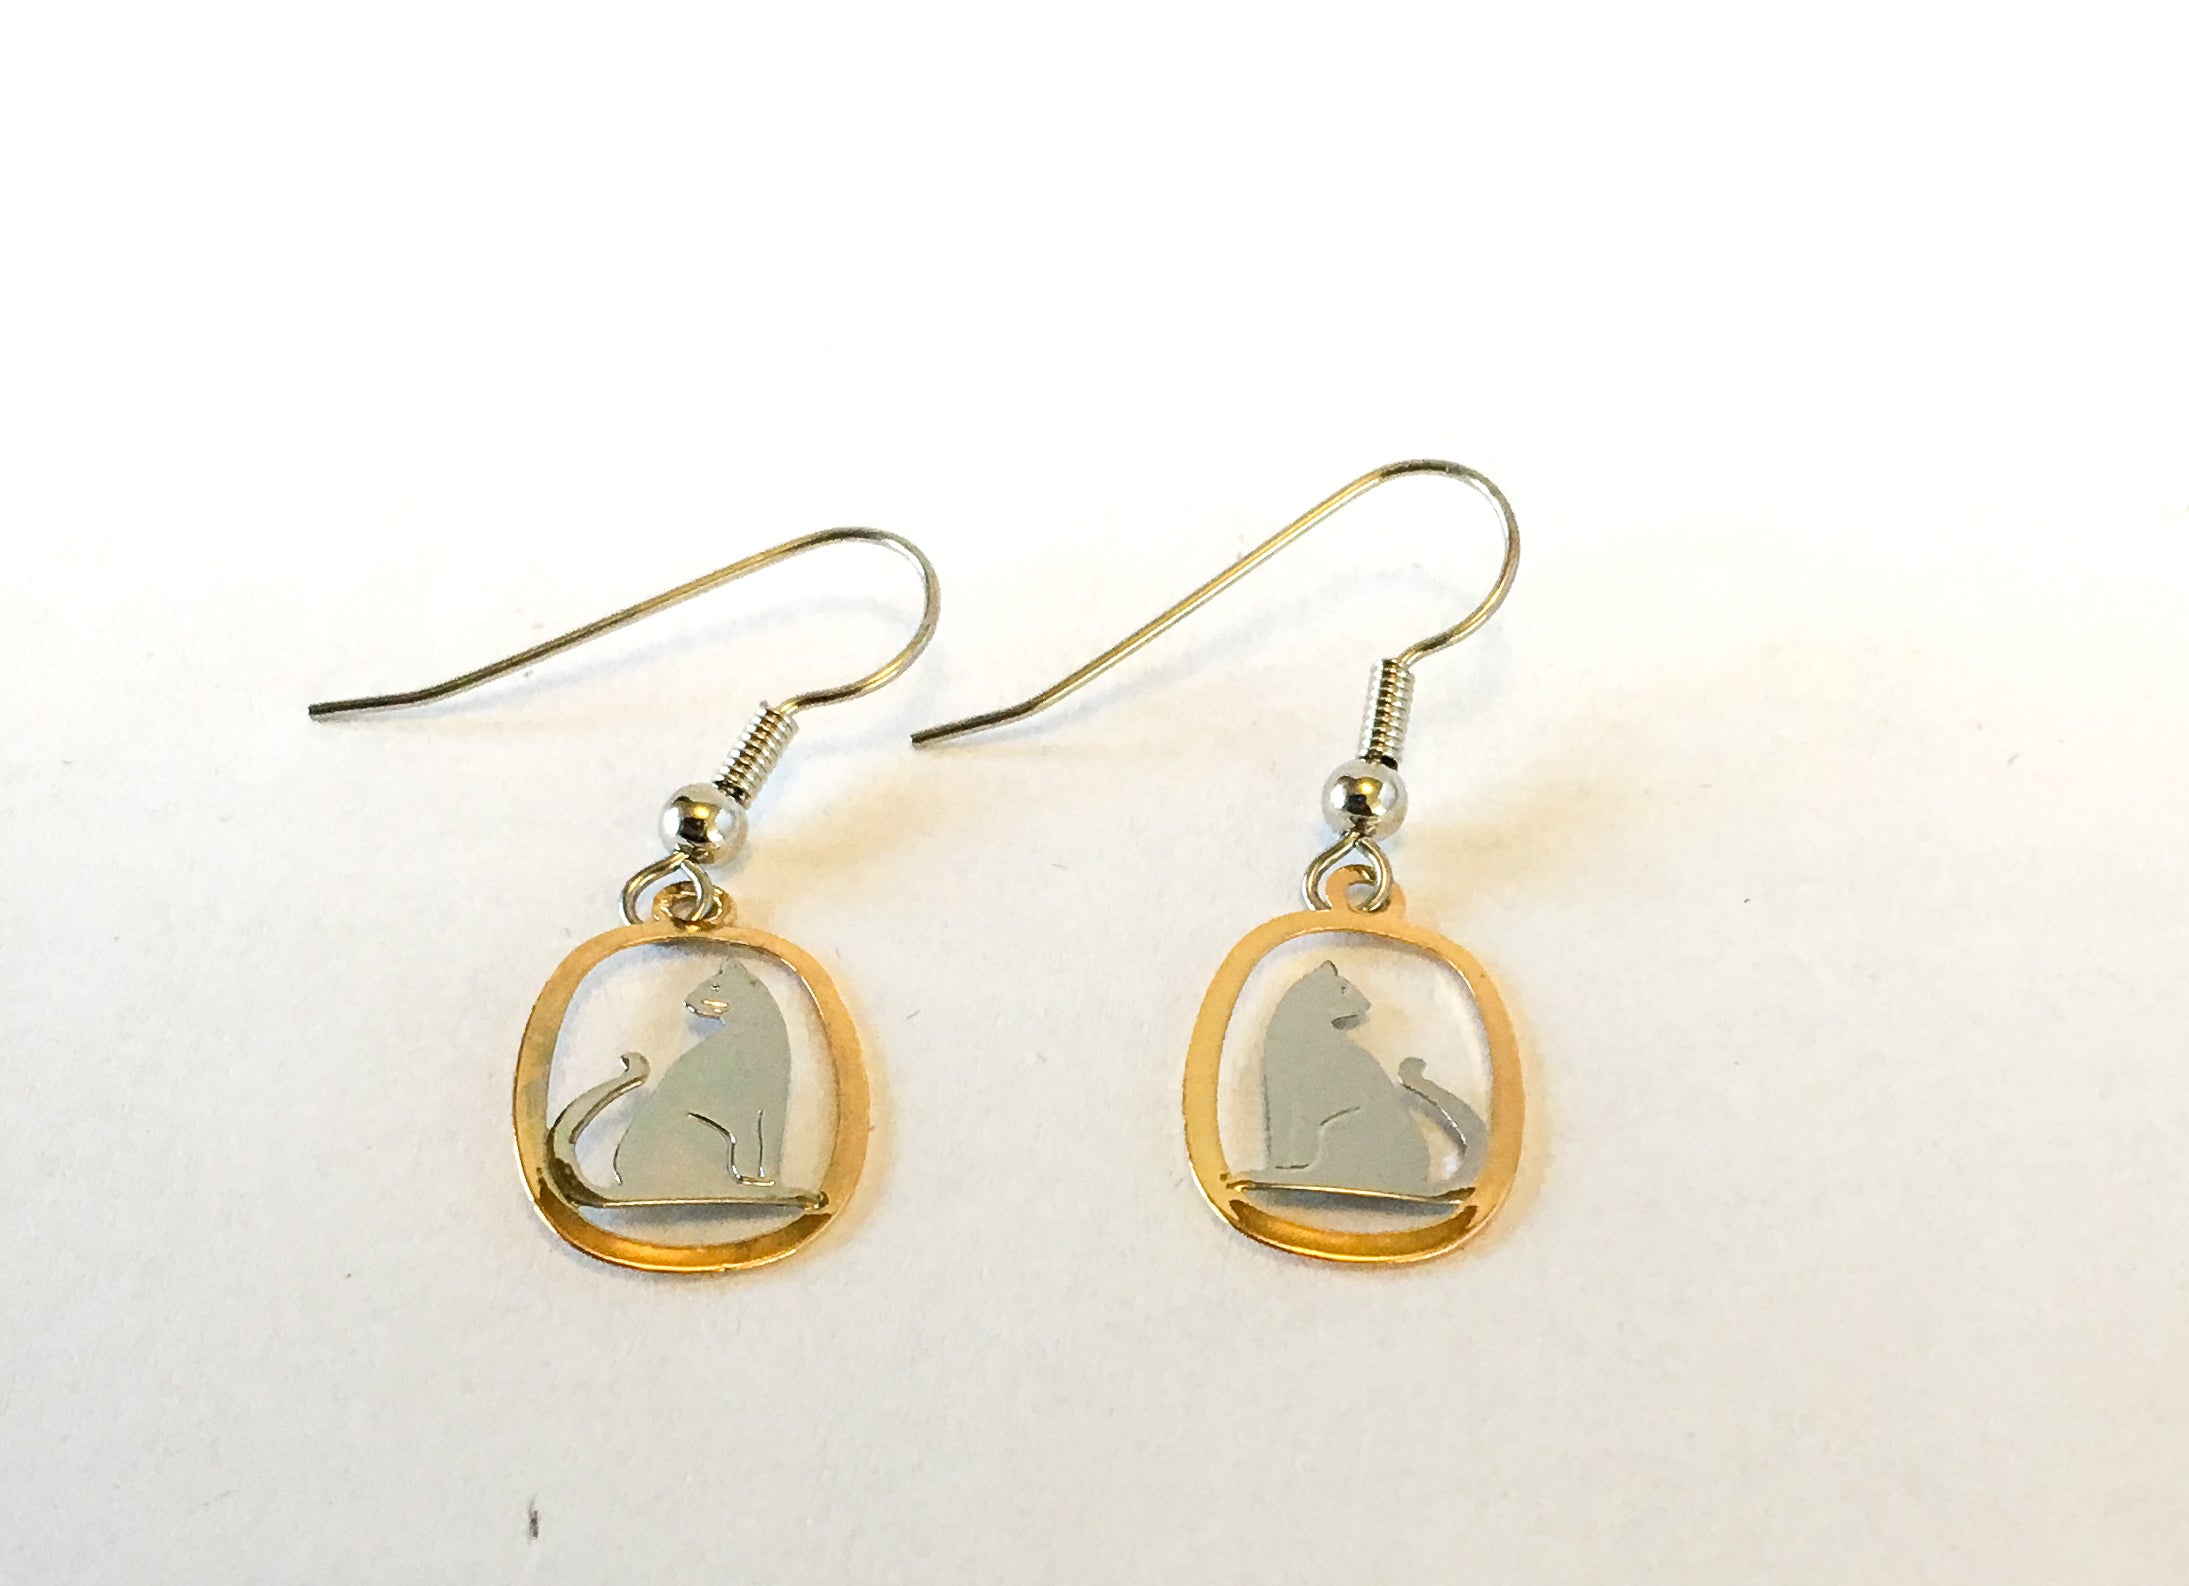 Silver and gold cat earrings facing out